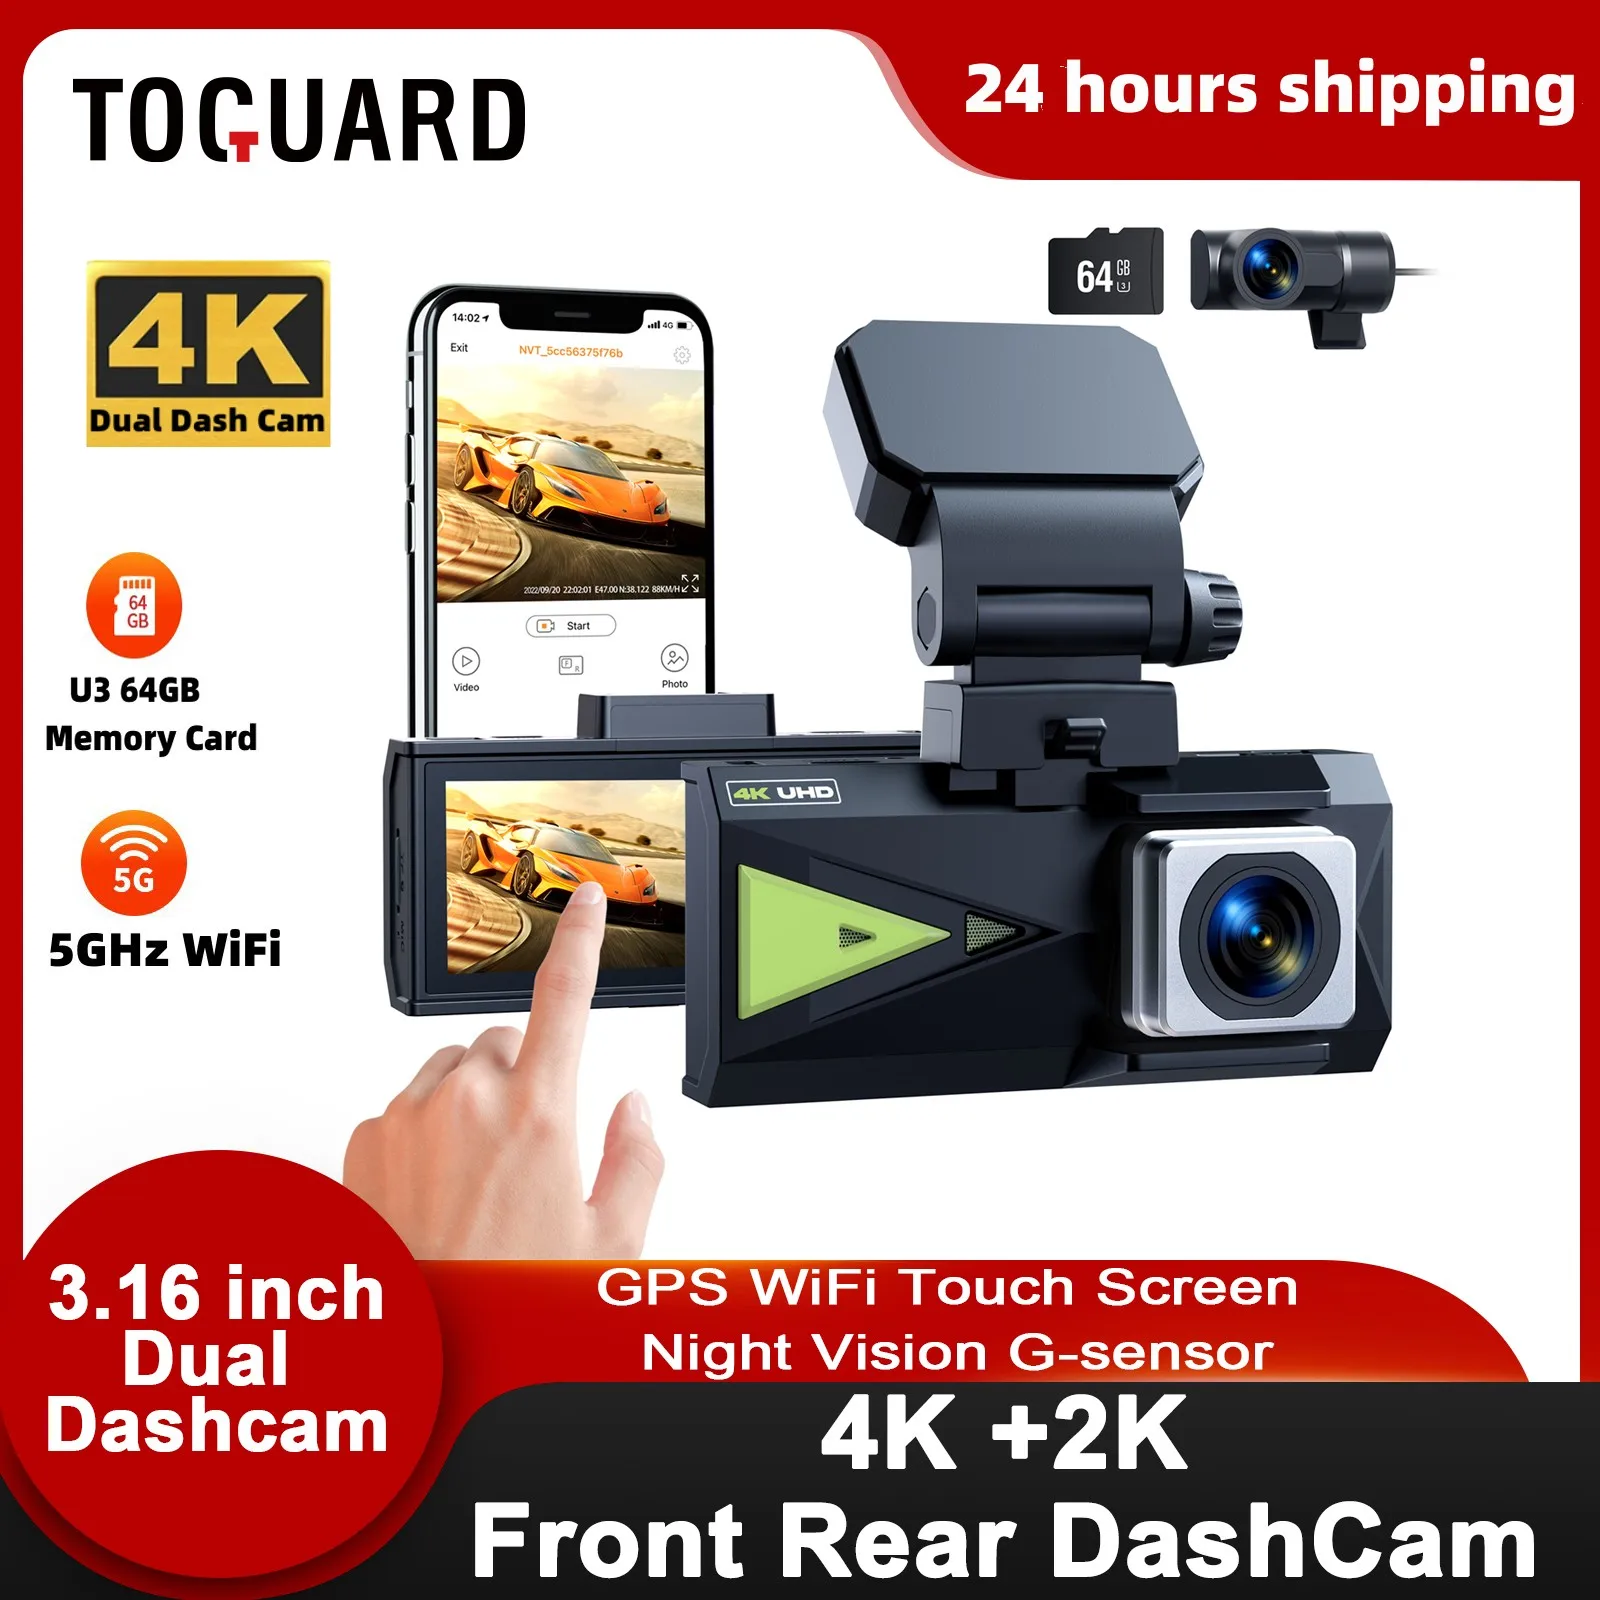 

TOGUARD 2 Lens Dash Cam 4K Front and 2K Rear 5Ghz WiFi i Video Recorder Type-C port GPS Car DVR Touch Screen Night Vision